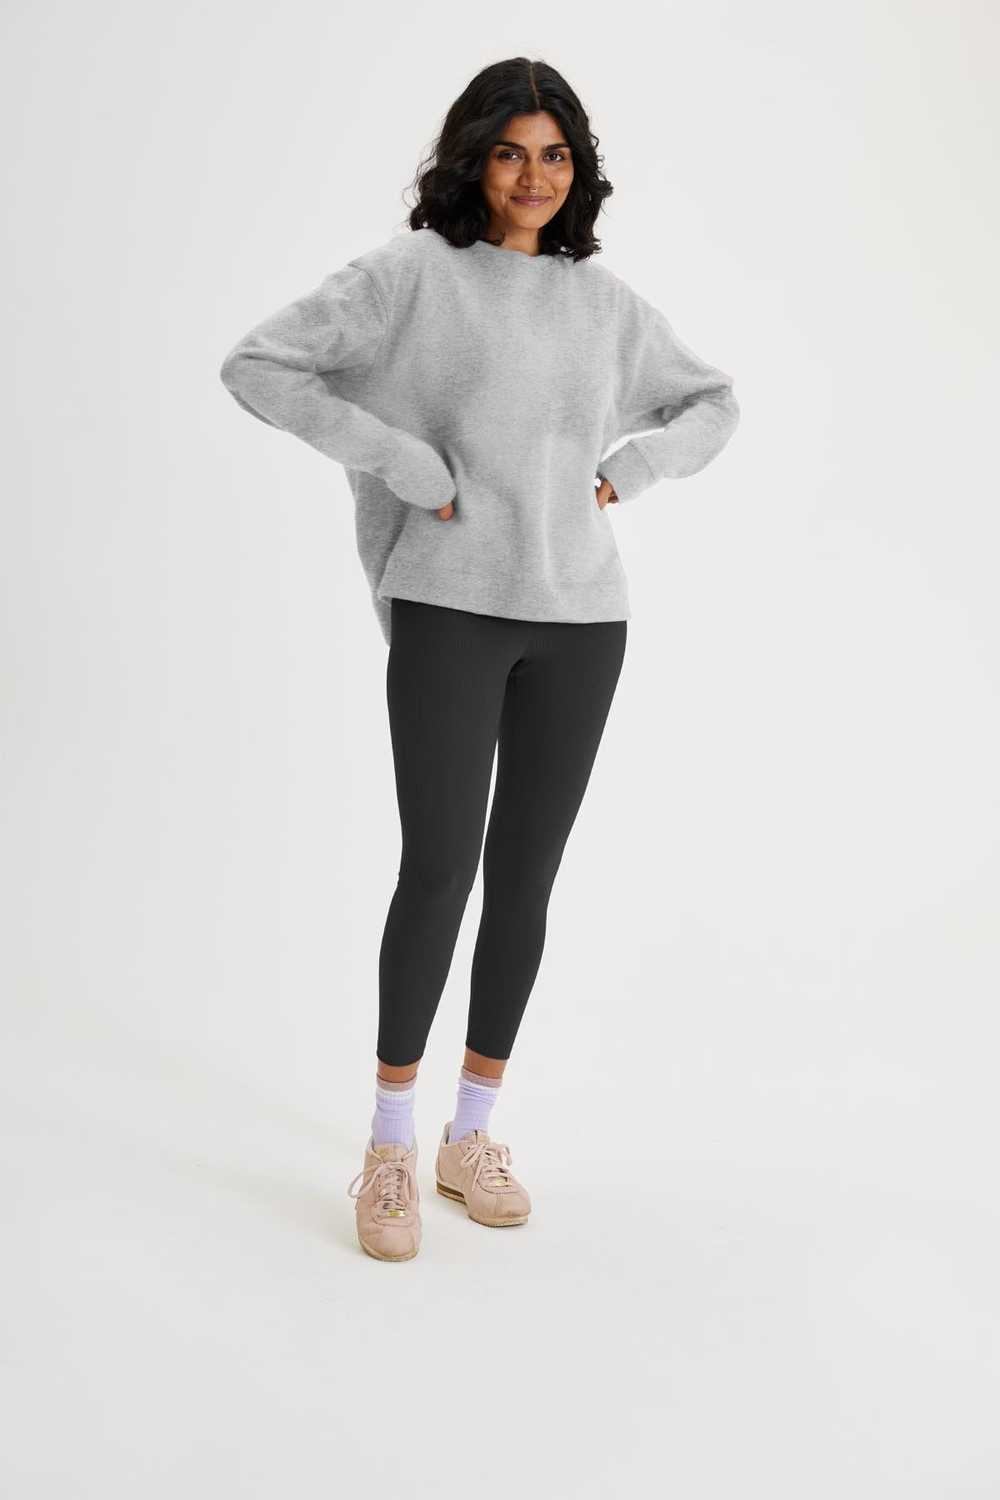 Girlfriend Collective Heather Grey 50/50 Classic … - image 6